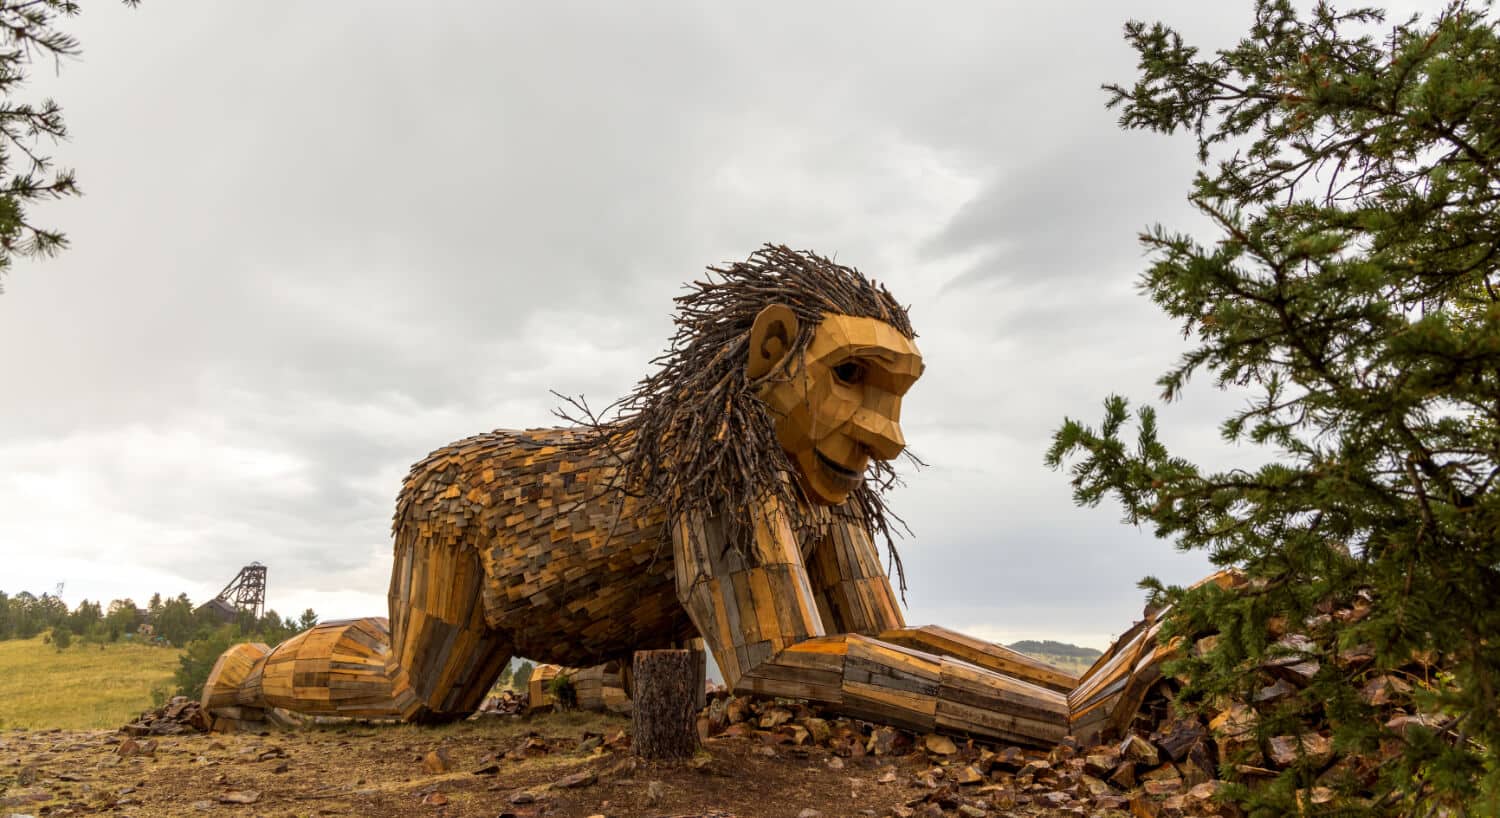 A large wood troll named Rita the Rock Planter made out of recycled wood kneeling and placing rocks in front of pine trees and a gold mining tower in the background.